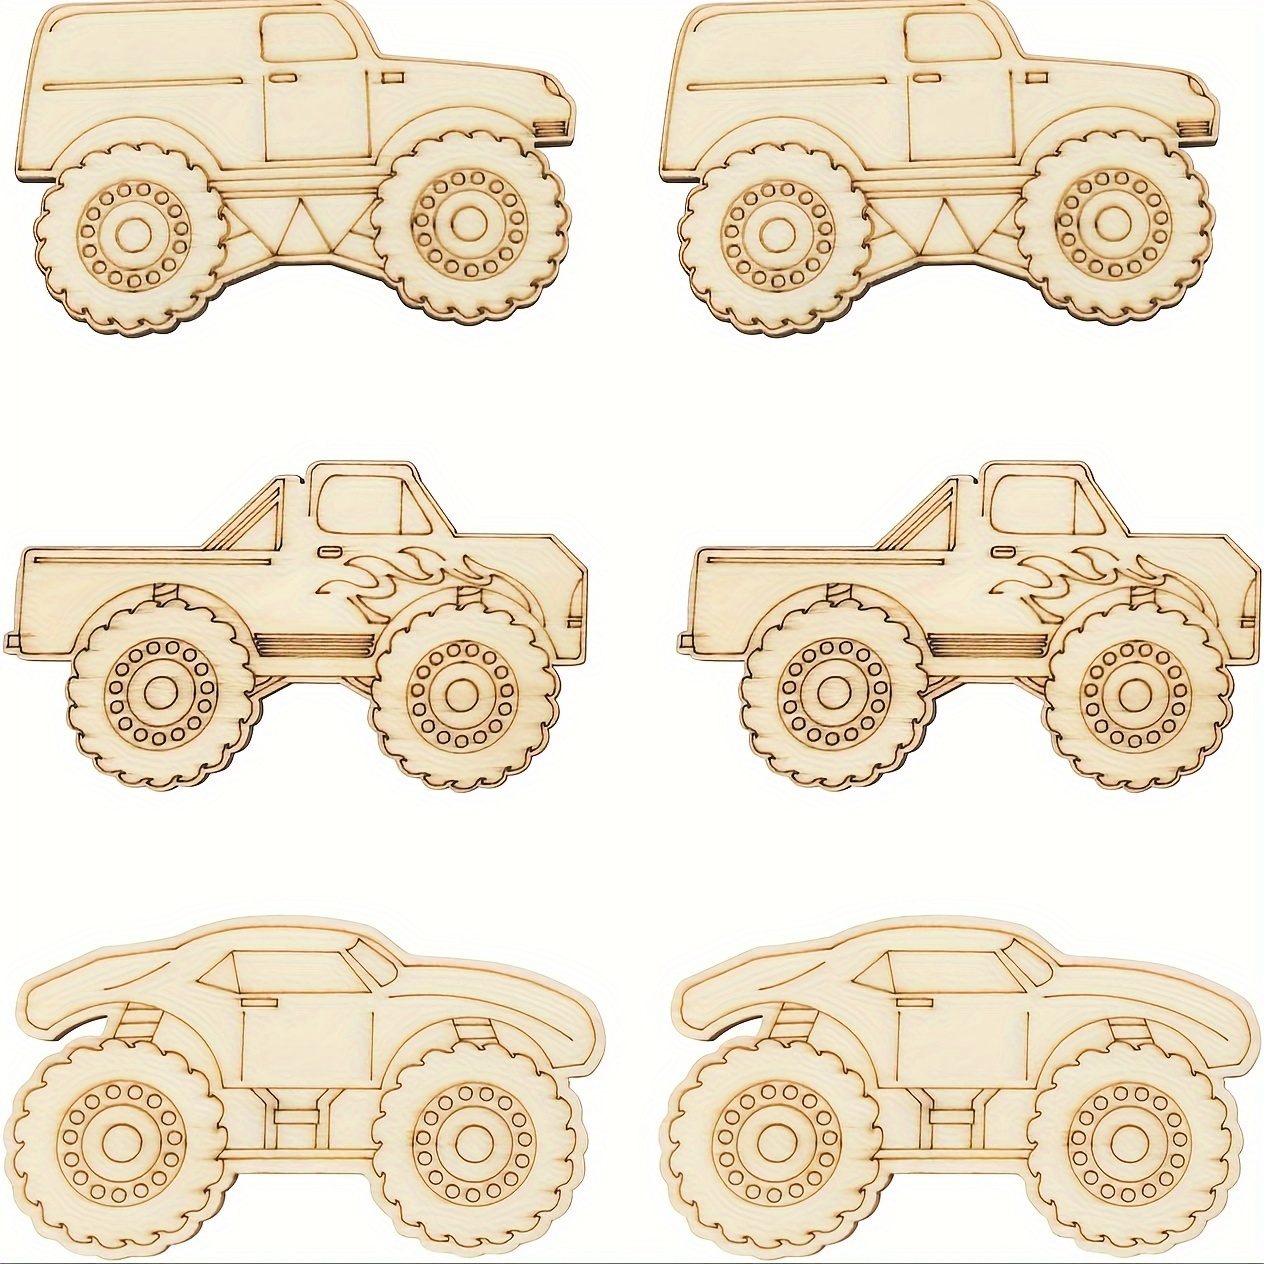 

30pcs Wood Truck Cutouts Crafts Truck Party Game Favors Vehicles To Paint Wooden Truck Ornaments Diy Gift Tags For Home Party Decoration Craft Project